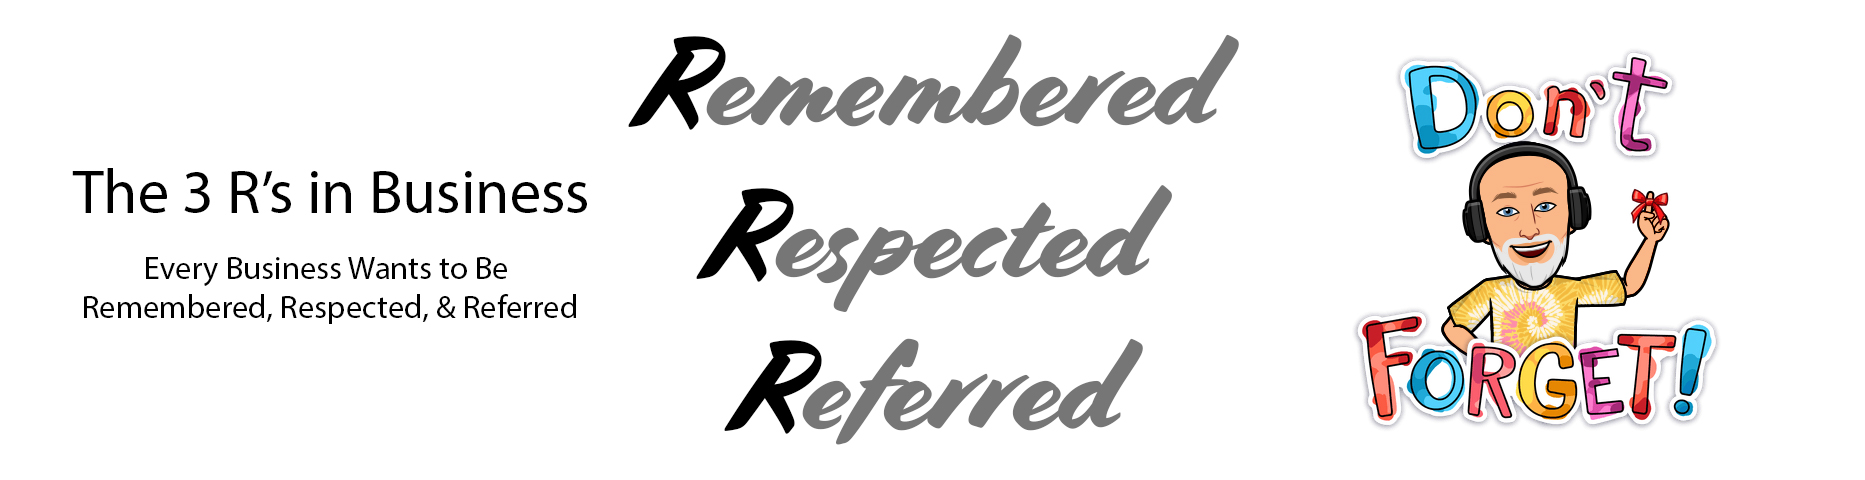 The 3 R’s – Every Business Wants to Be Remembered, Respected, & Referred